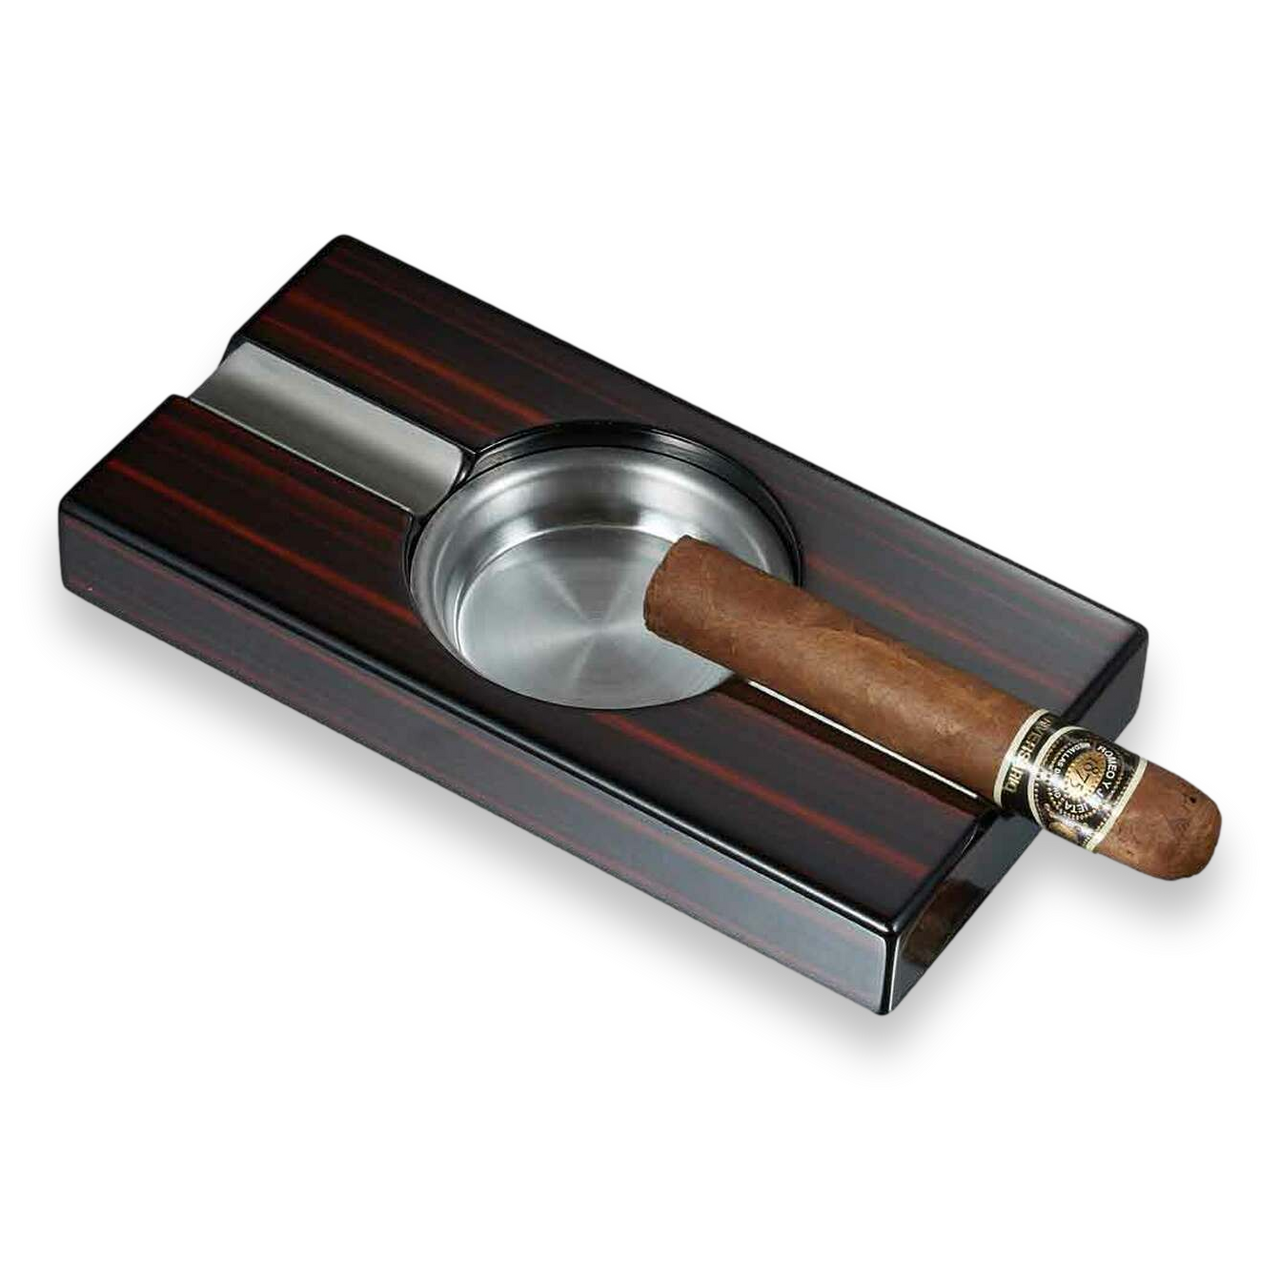 https://cdn11.bigcommerce.com/s-c63ufk/images/stencil/1280x1280/products/1562/7784/Visol-Windsor-Metal-2-Cigar-Ashtray-VASH705A-Exterior-Front-with-Cigar-1_clipped_rev_1__65770.1616884429.png?c=2?imbypass=on